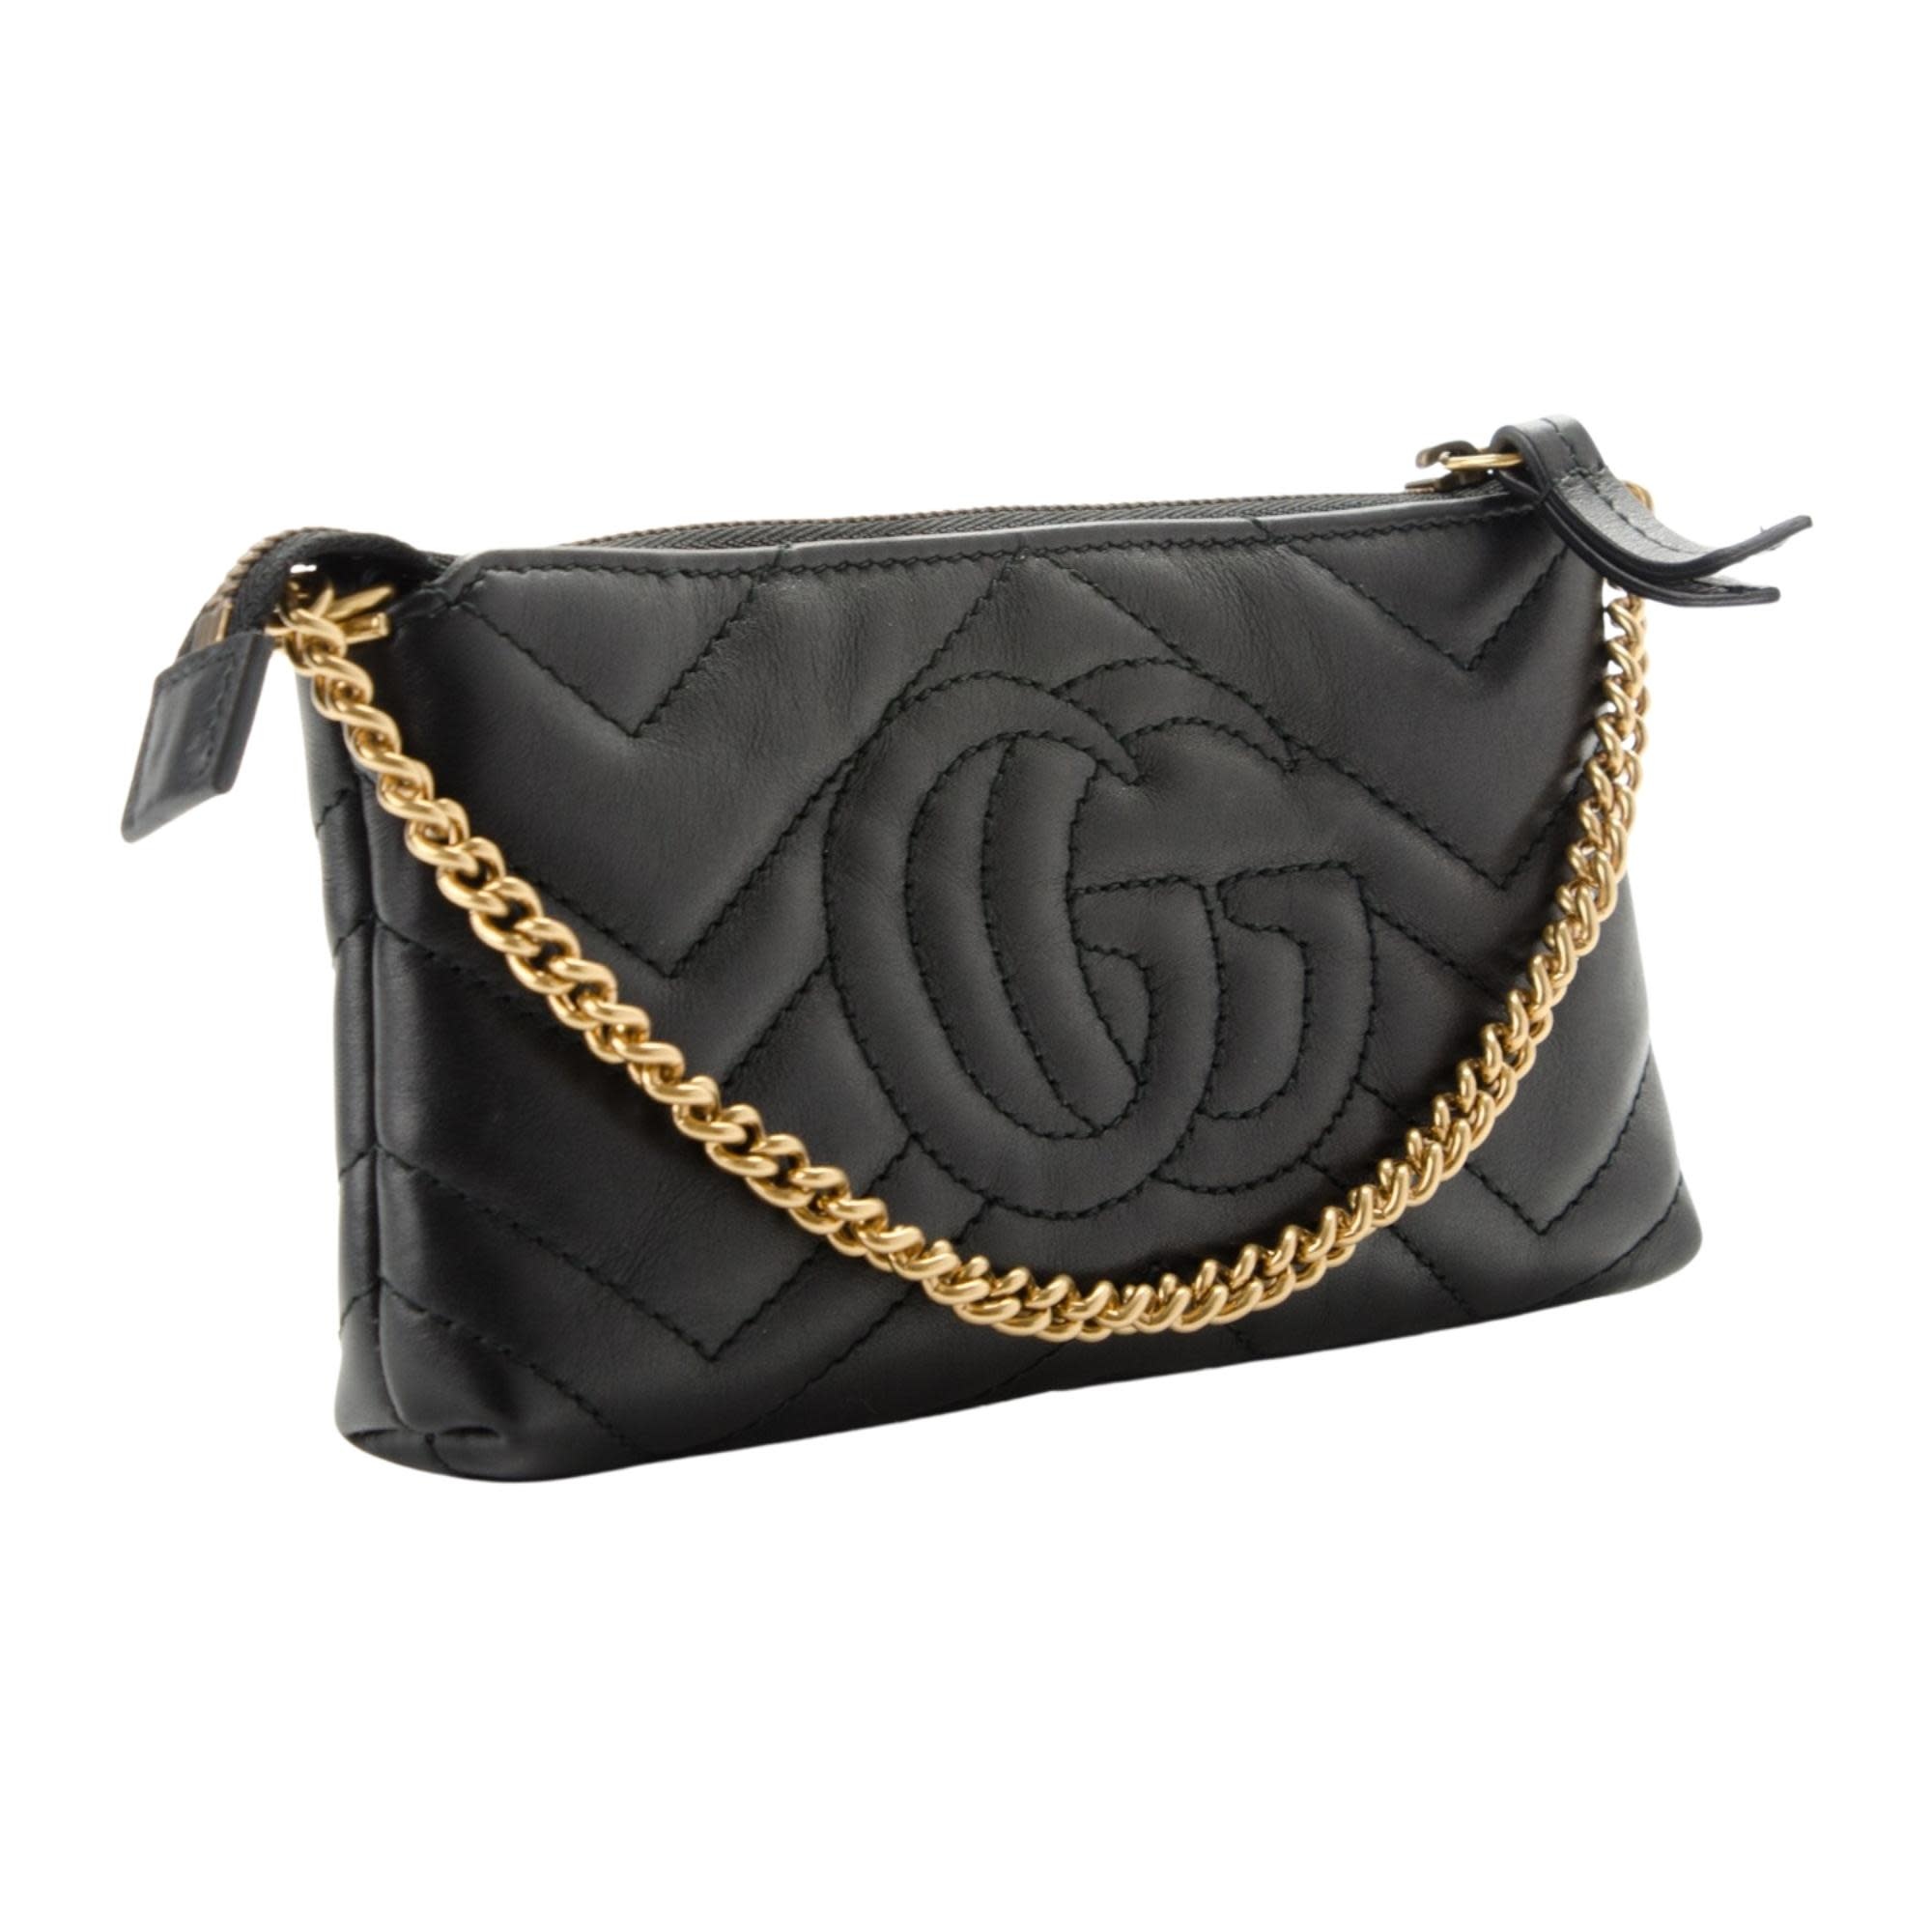 GG MARMONT MINI BAG IN MATELASSÉ LEATHER WITH CHAIN – Suit Negozi Row